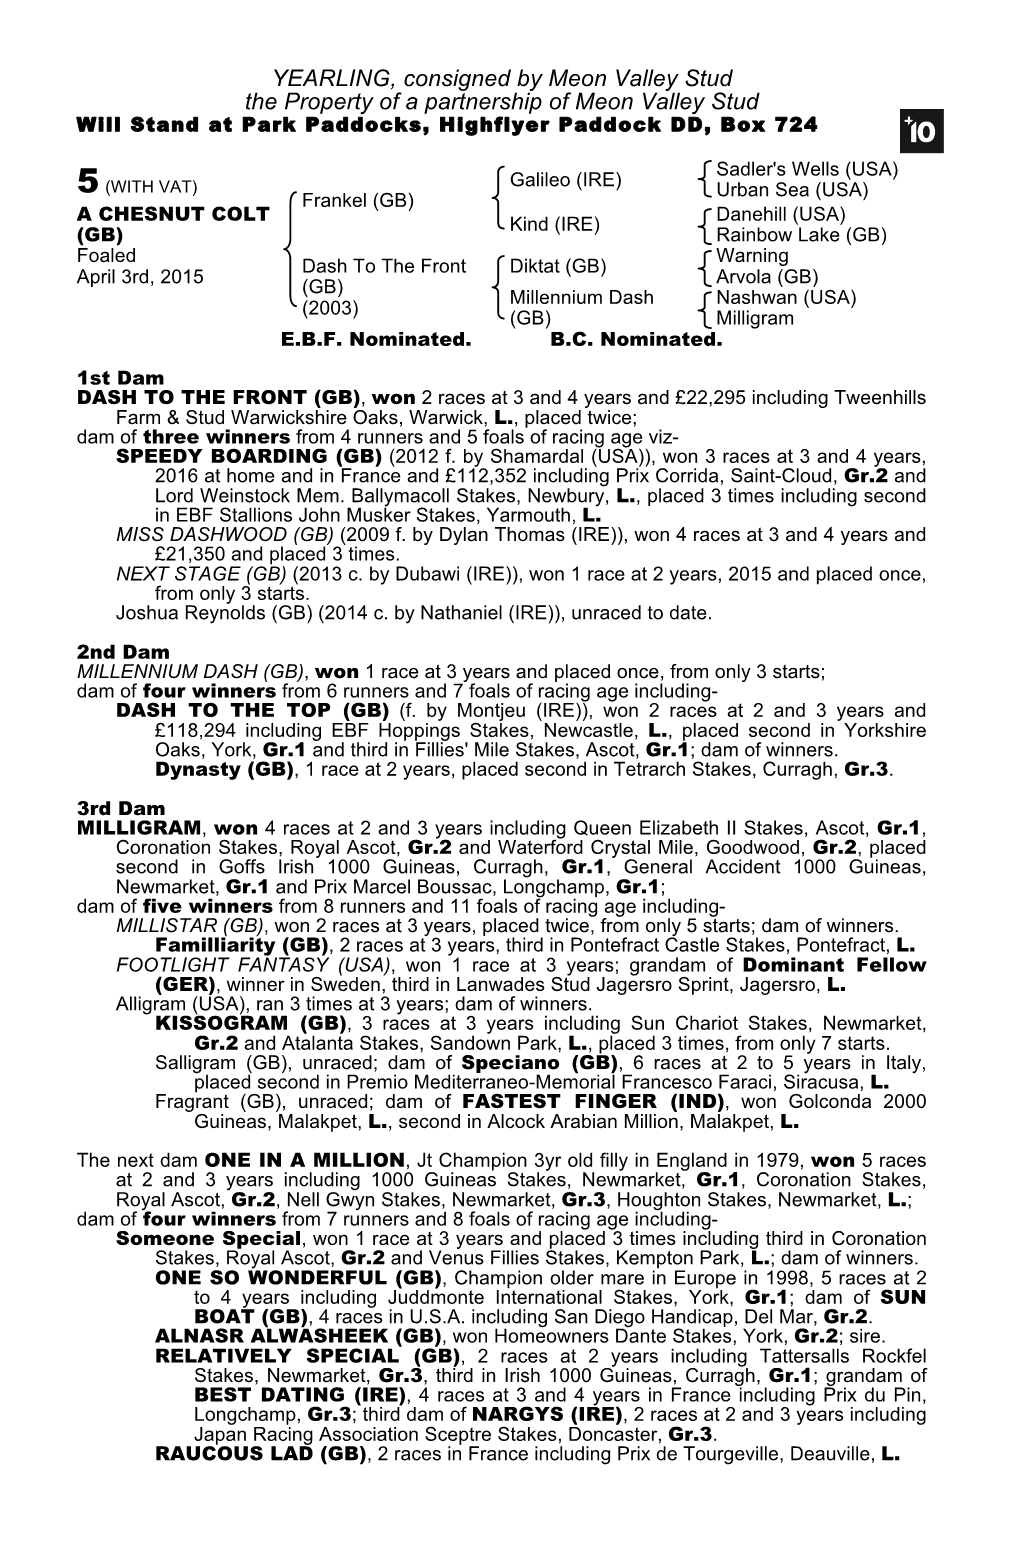 YEARLING, Consigned by Meon Valley Stud the Property of a Partnership of Meon Valley Stud Will Stand at Park Paddocks, Highflyer Paddock DD, Box 724